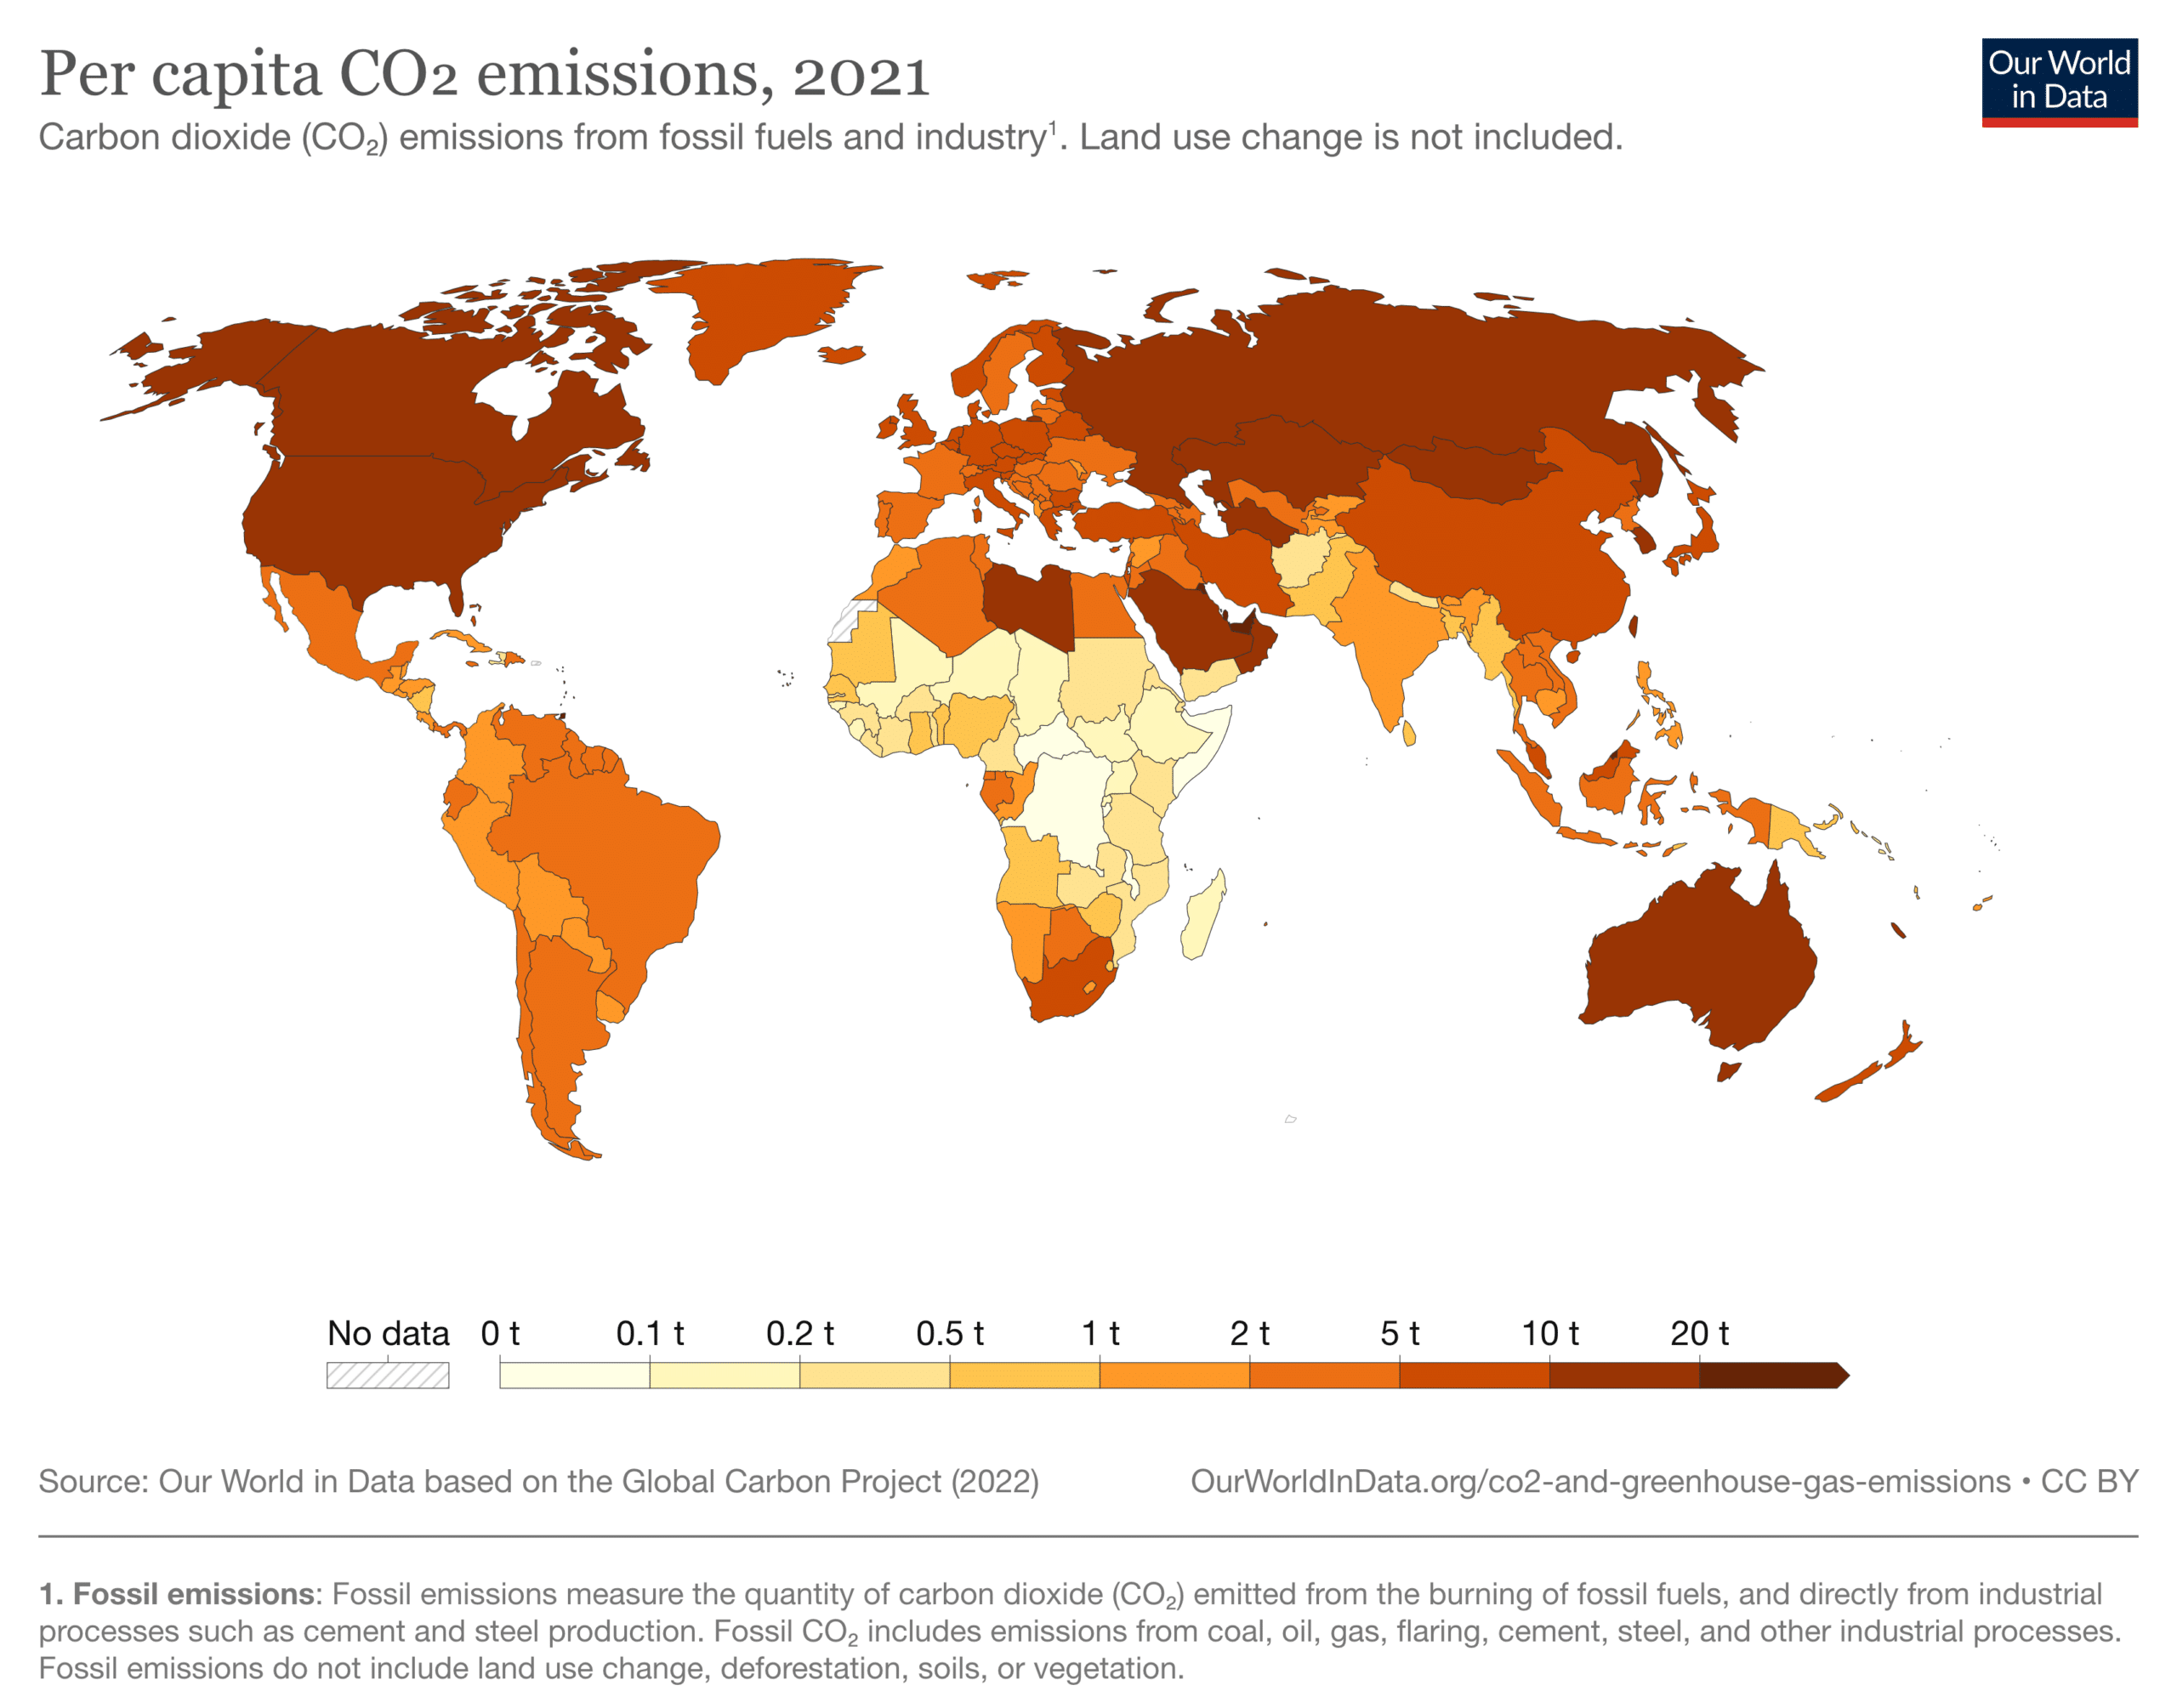 Per capita carbon dioxide (CO₂) emissions from fossil fuels and industry. Land use change is not included. Image by Our World in Data.